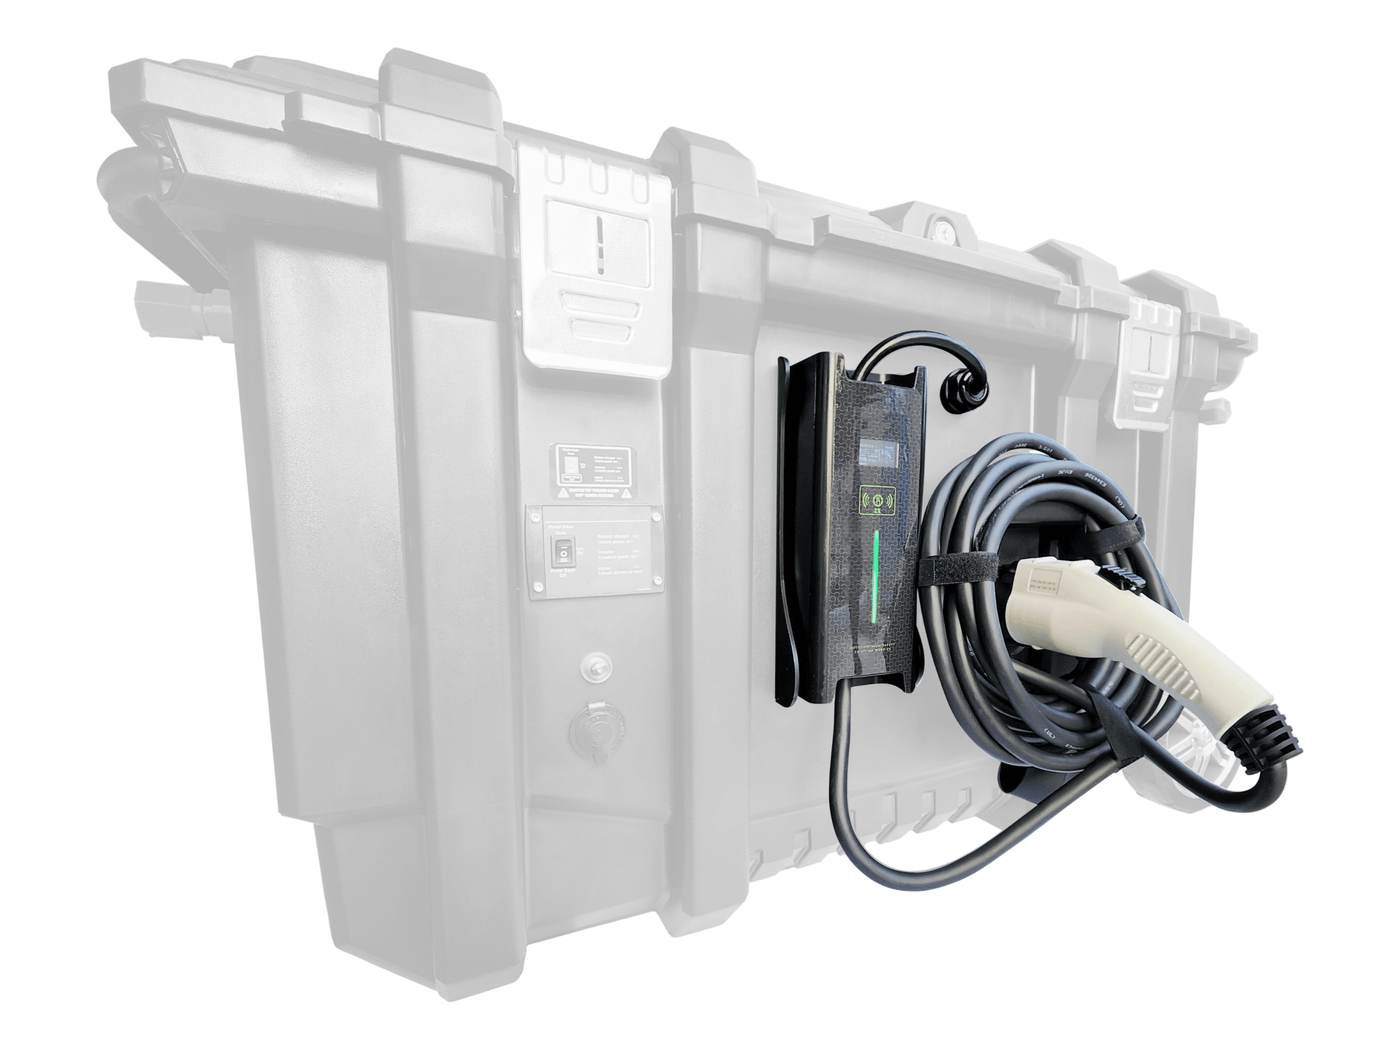 Add EV Electric Vehicle Level 2 Charger to CEP Rebel Solar Generator - Cutting Edge Power